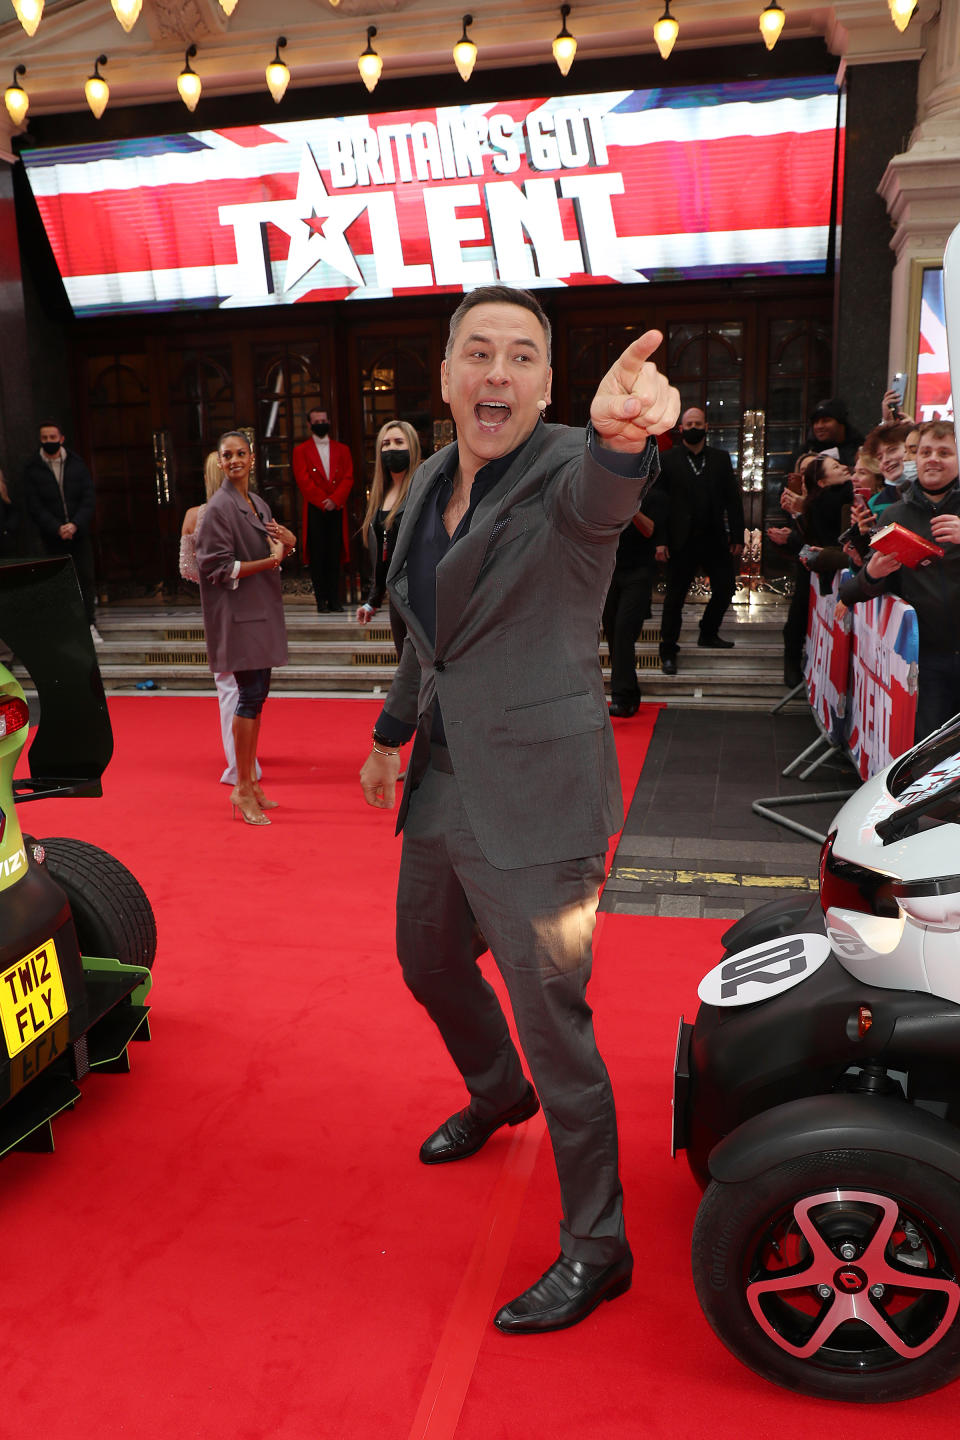 LONDON, ENGLAND - JANUARY 20: David Walliams arrives at the Britain's Got Talent Auditions at London Palladium on January 20, 2022 in London, England. (Photo by Neil Mockford/Getty Images)